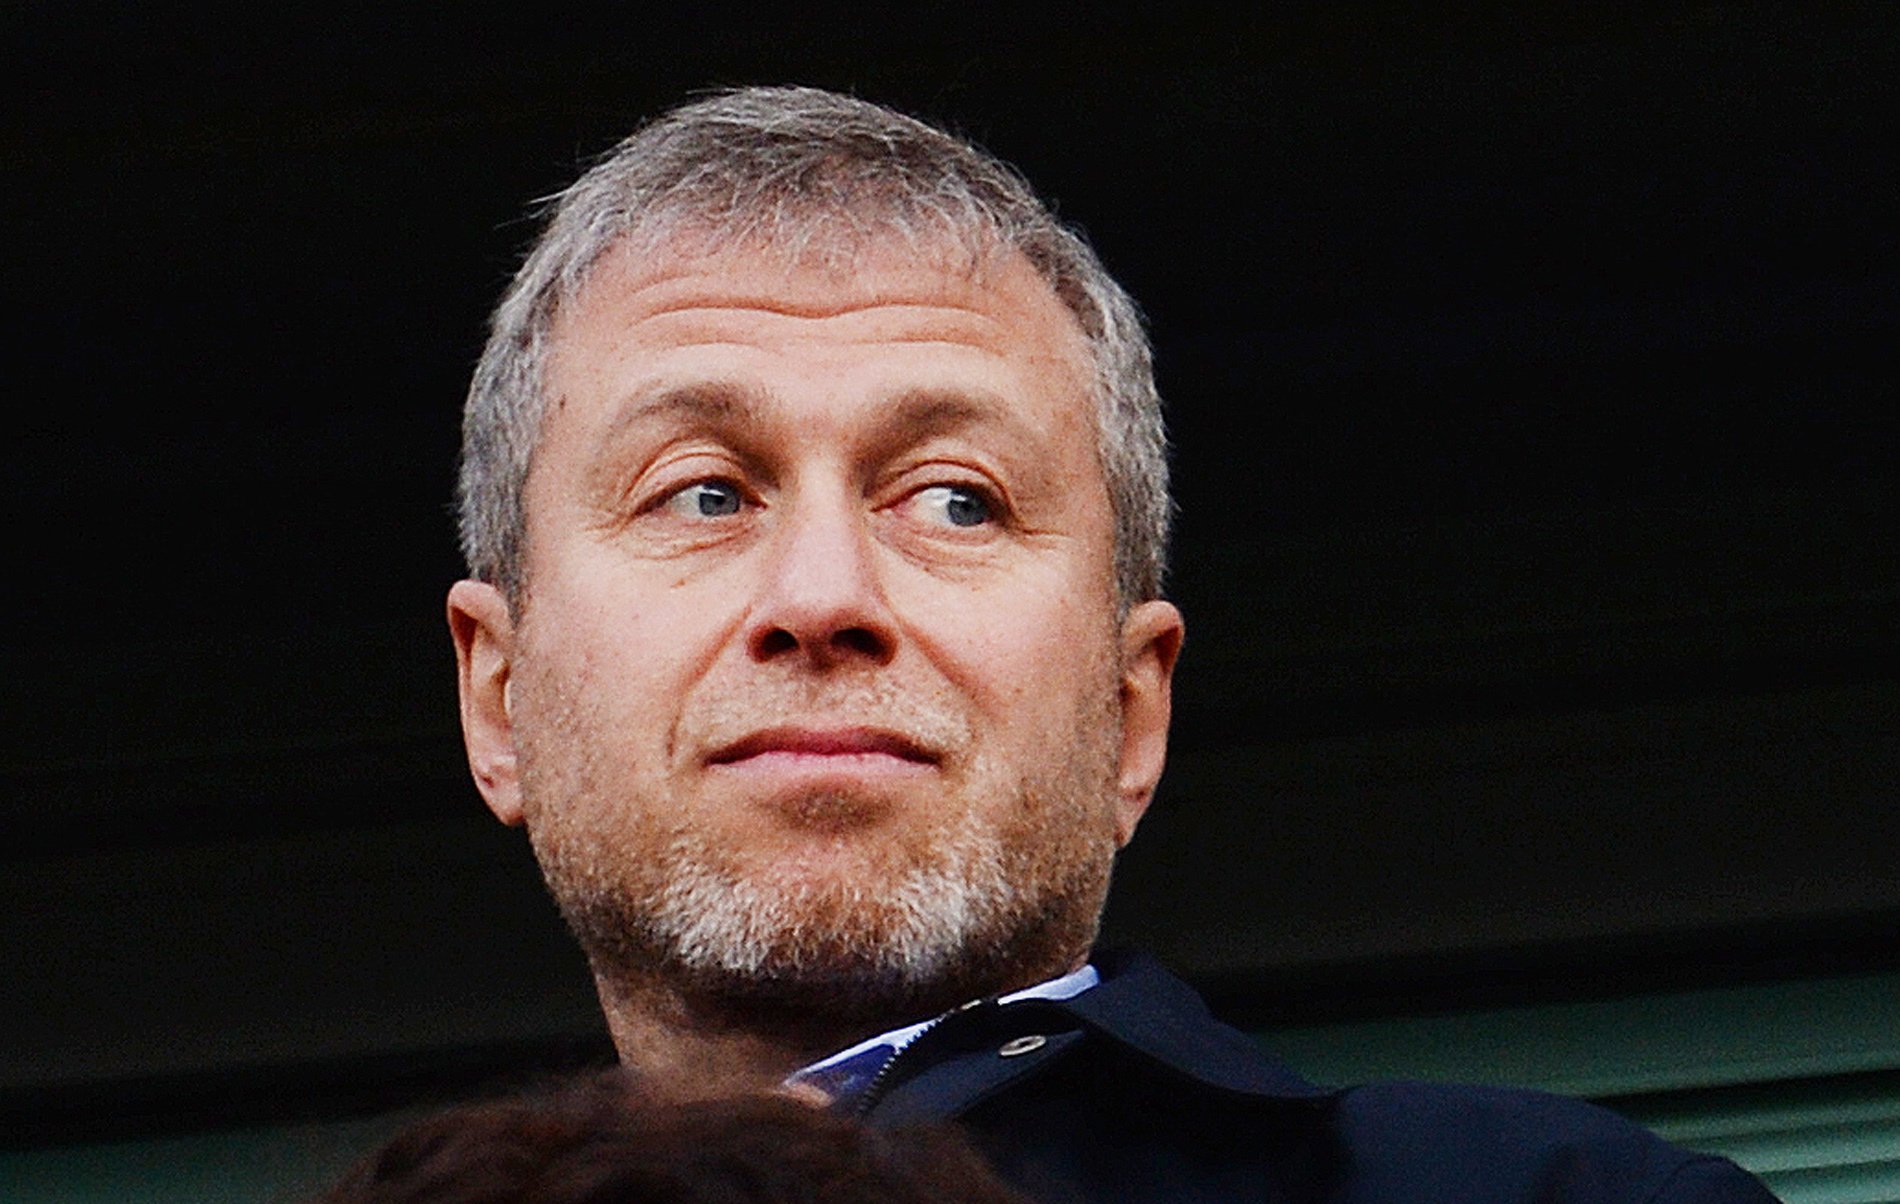 Abramovich and Ukraine negotiators showed symptoms of possible poisoning, says 'WSJ'